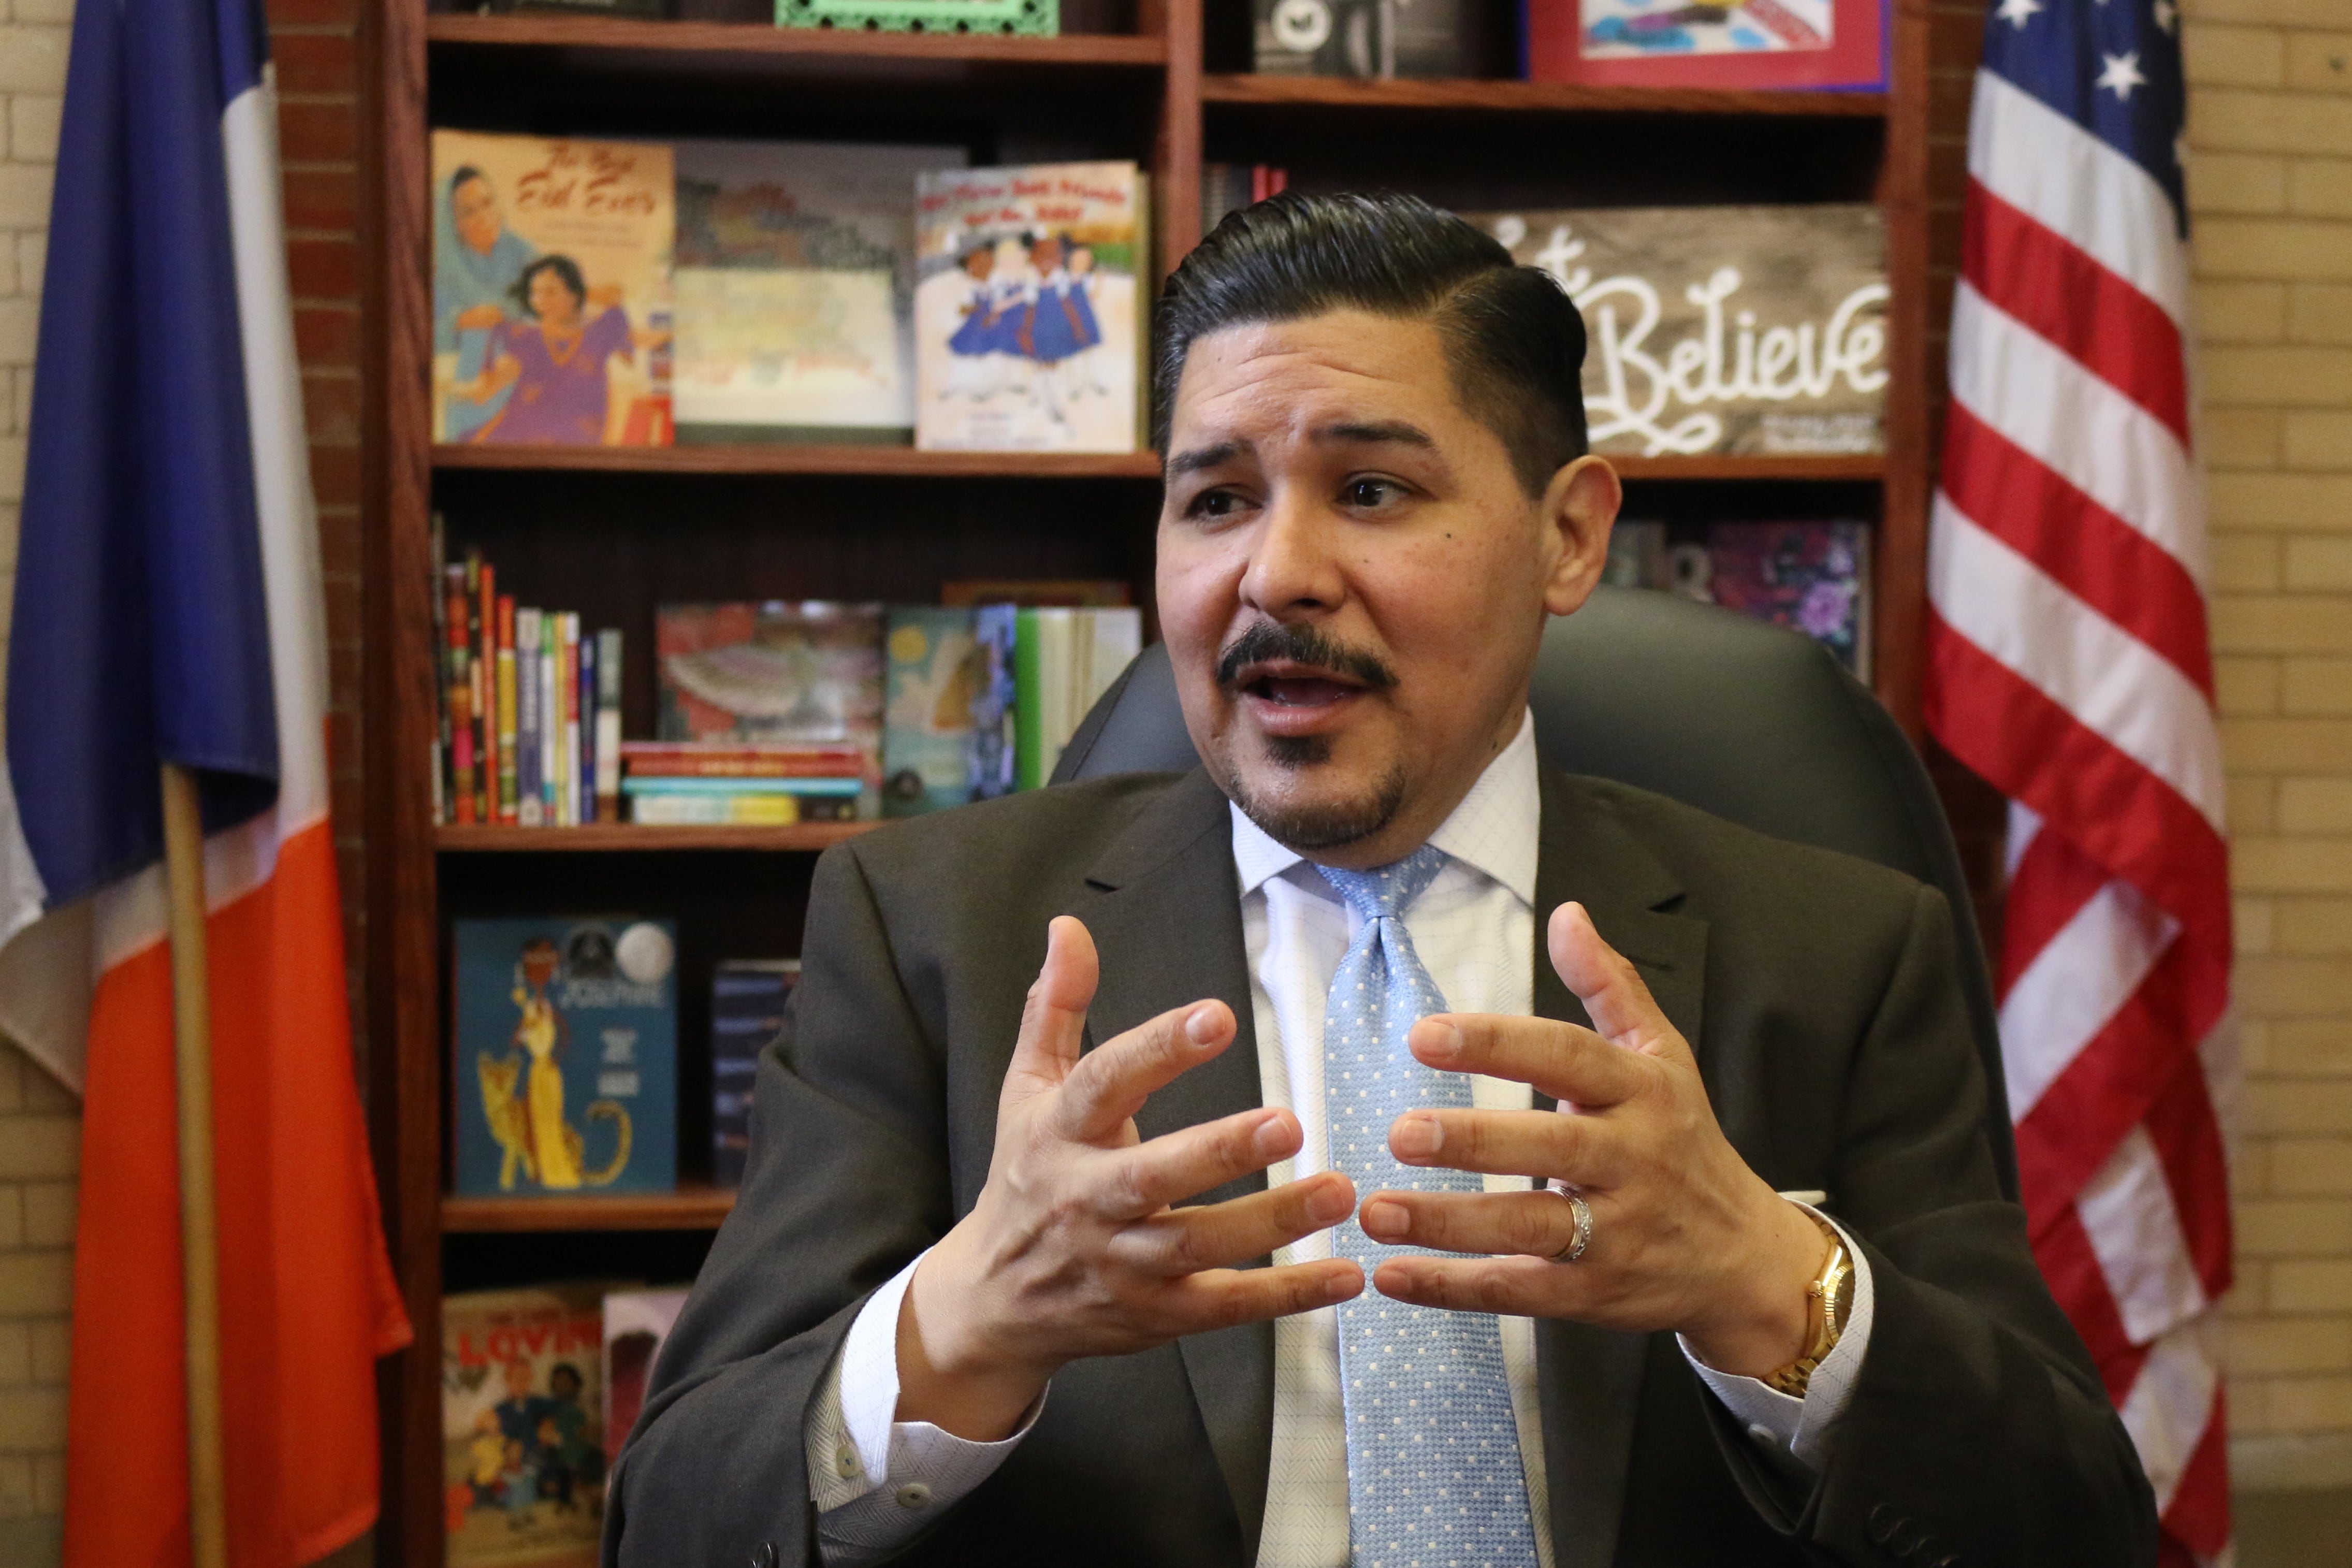 Schools Chancellor Richard Carranza at Tweed Courthouse, the education department’s headquarters.